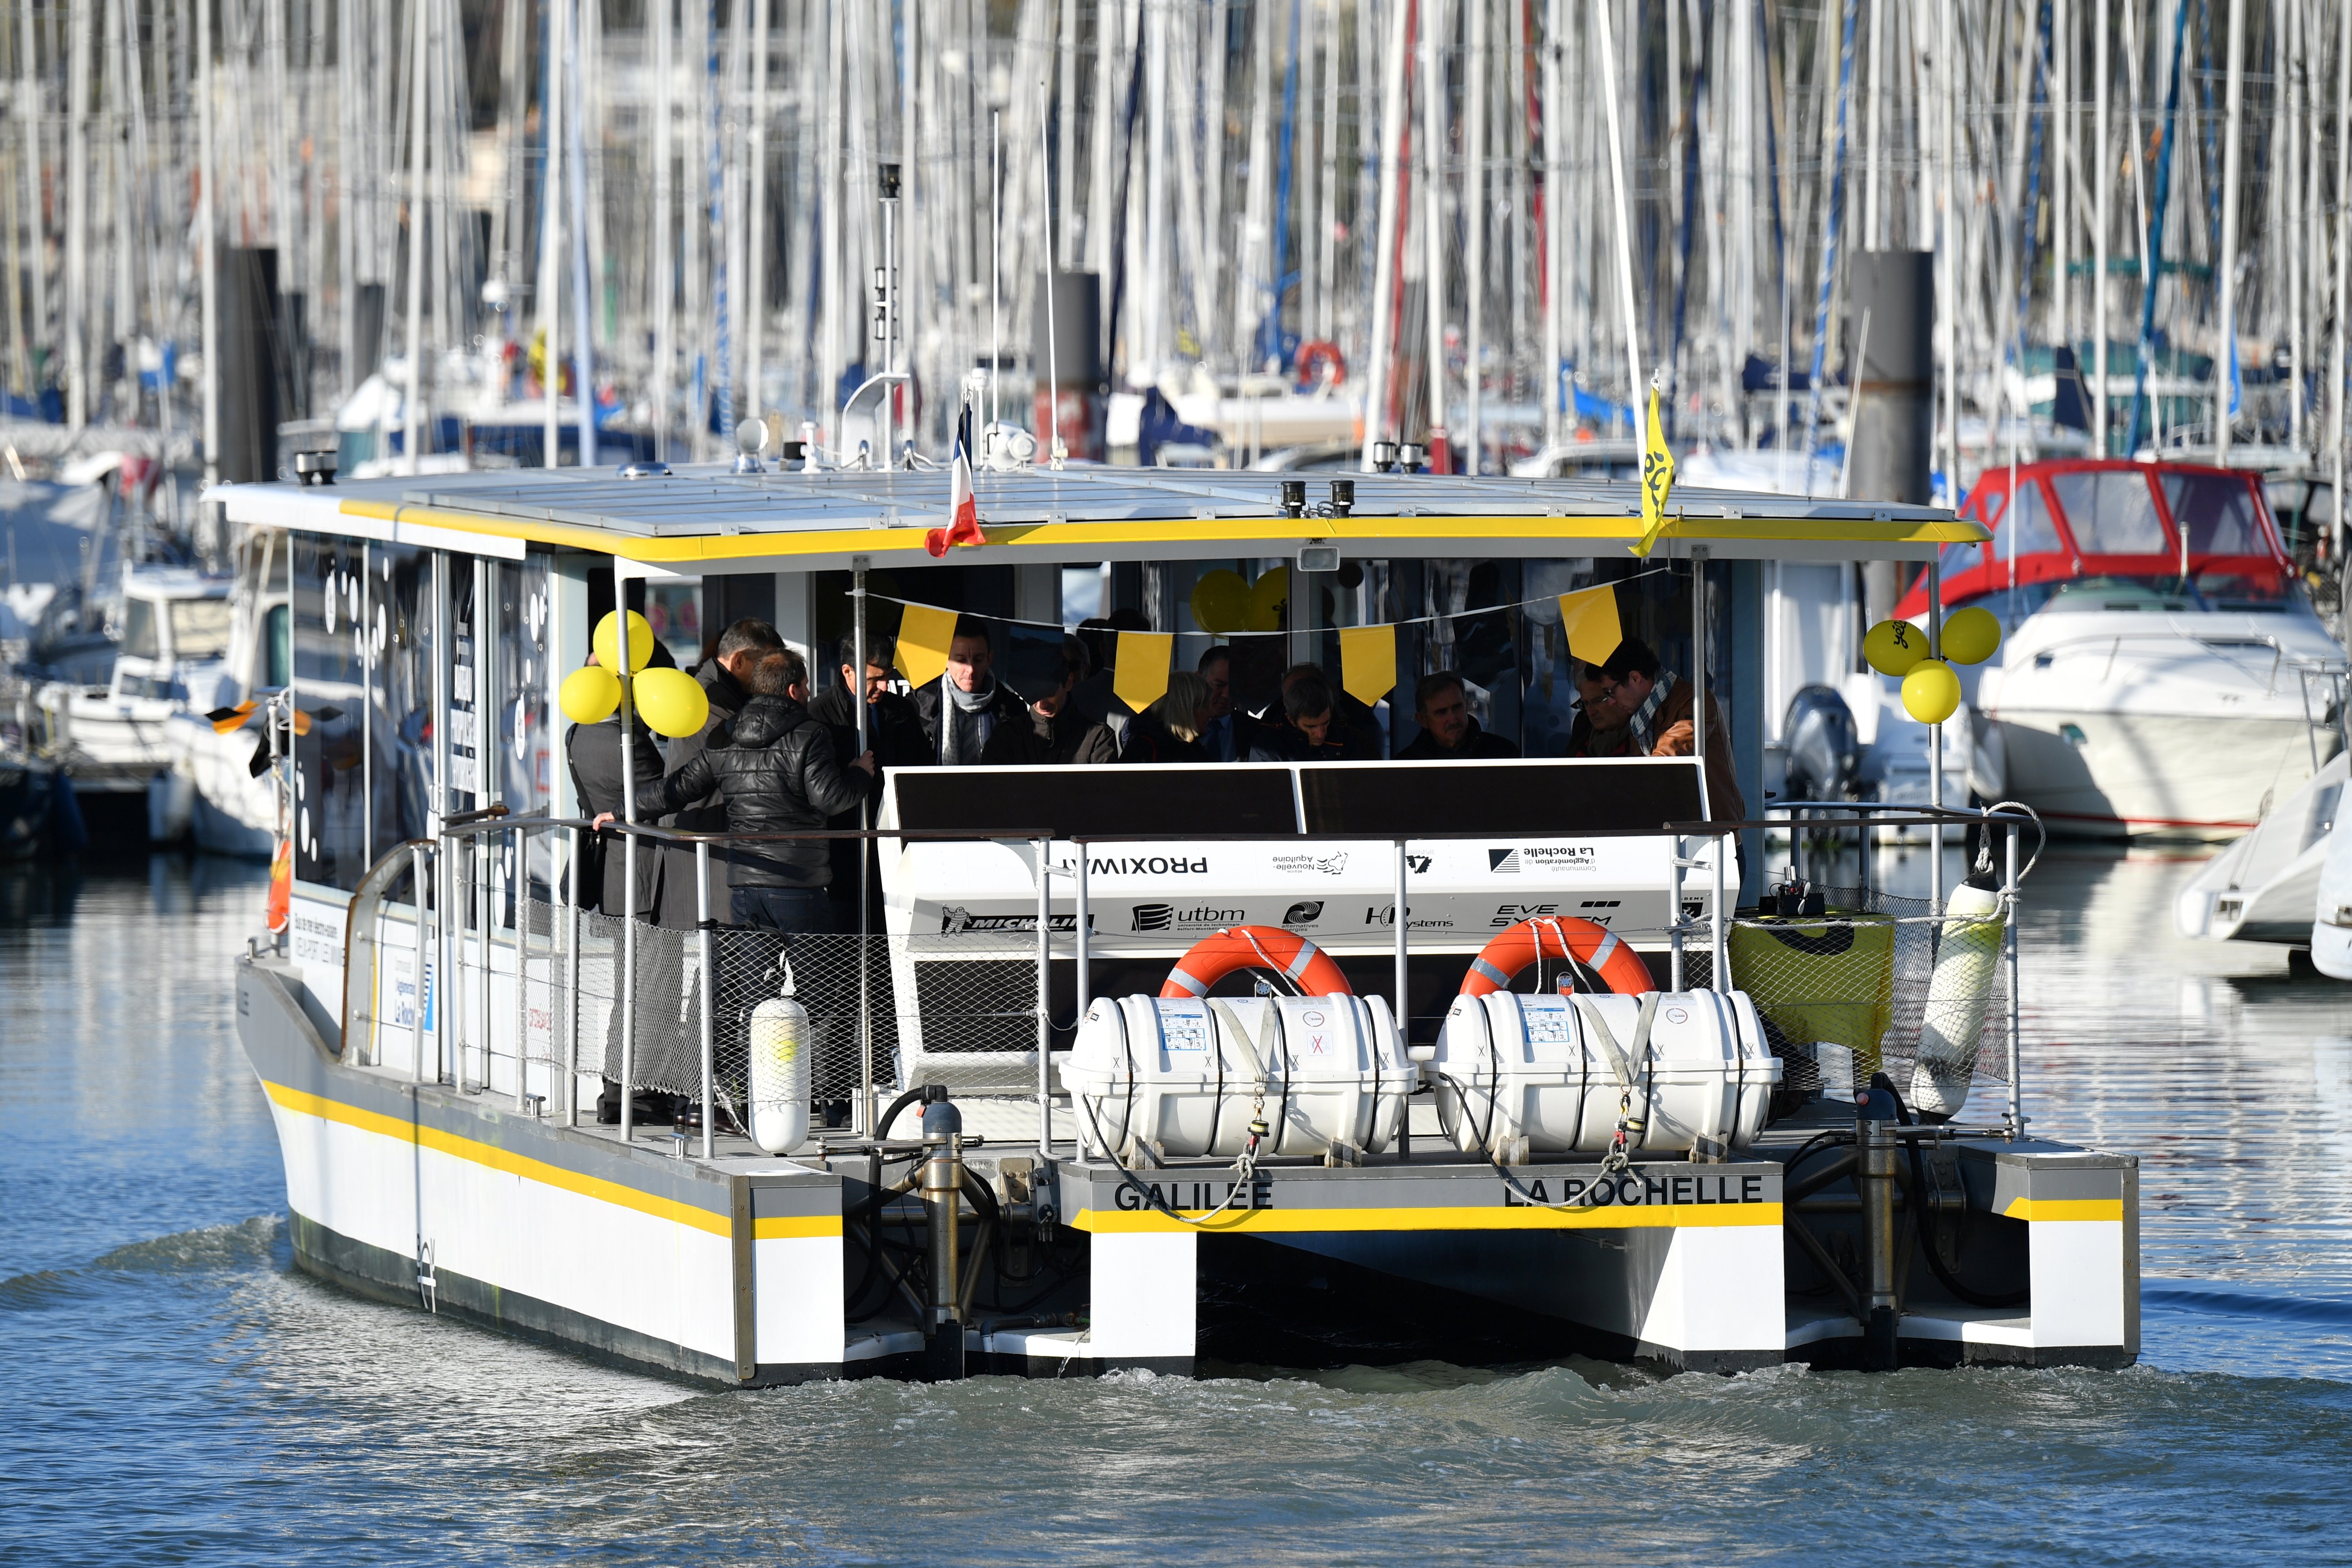 La Rochelle launches first ever hydrogen powered ‘sea bus’